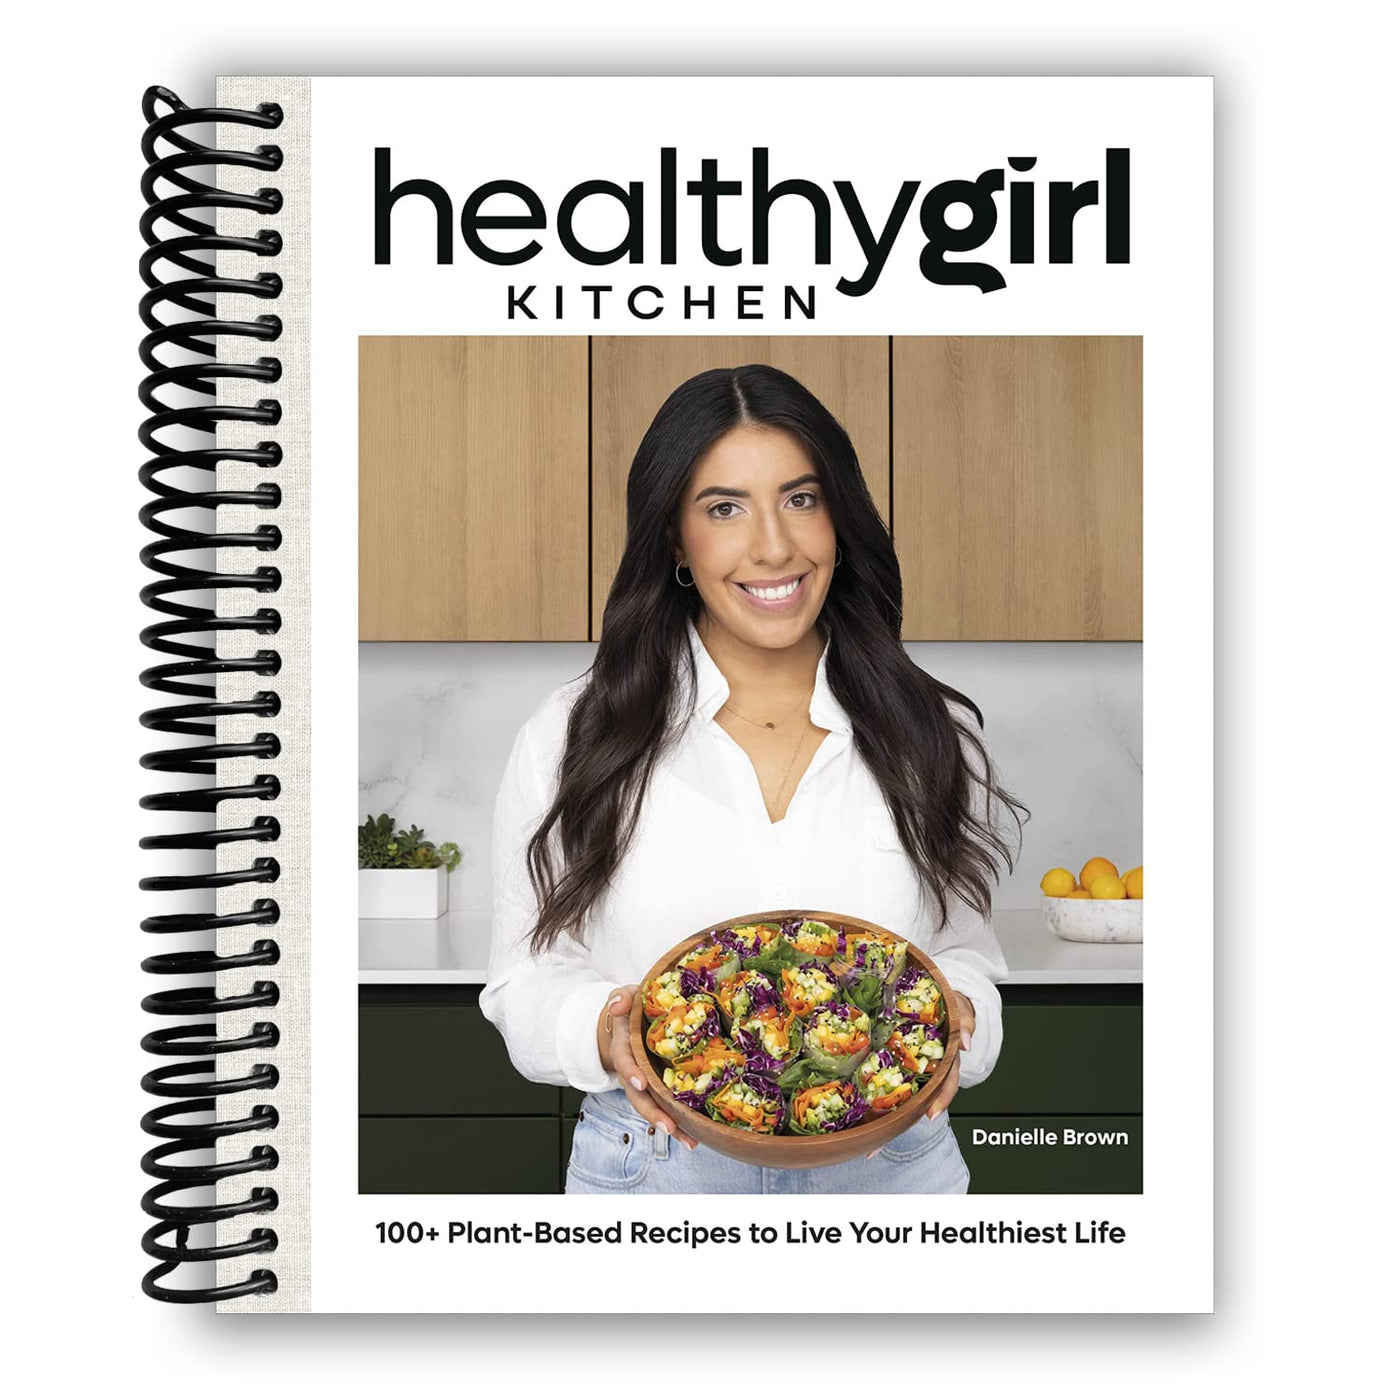 HealthyGirl Kitchen: 100+ Plant-Based Recipes to Live Your Healthiest Life (Spiral Bound)